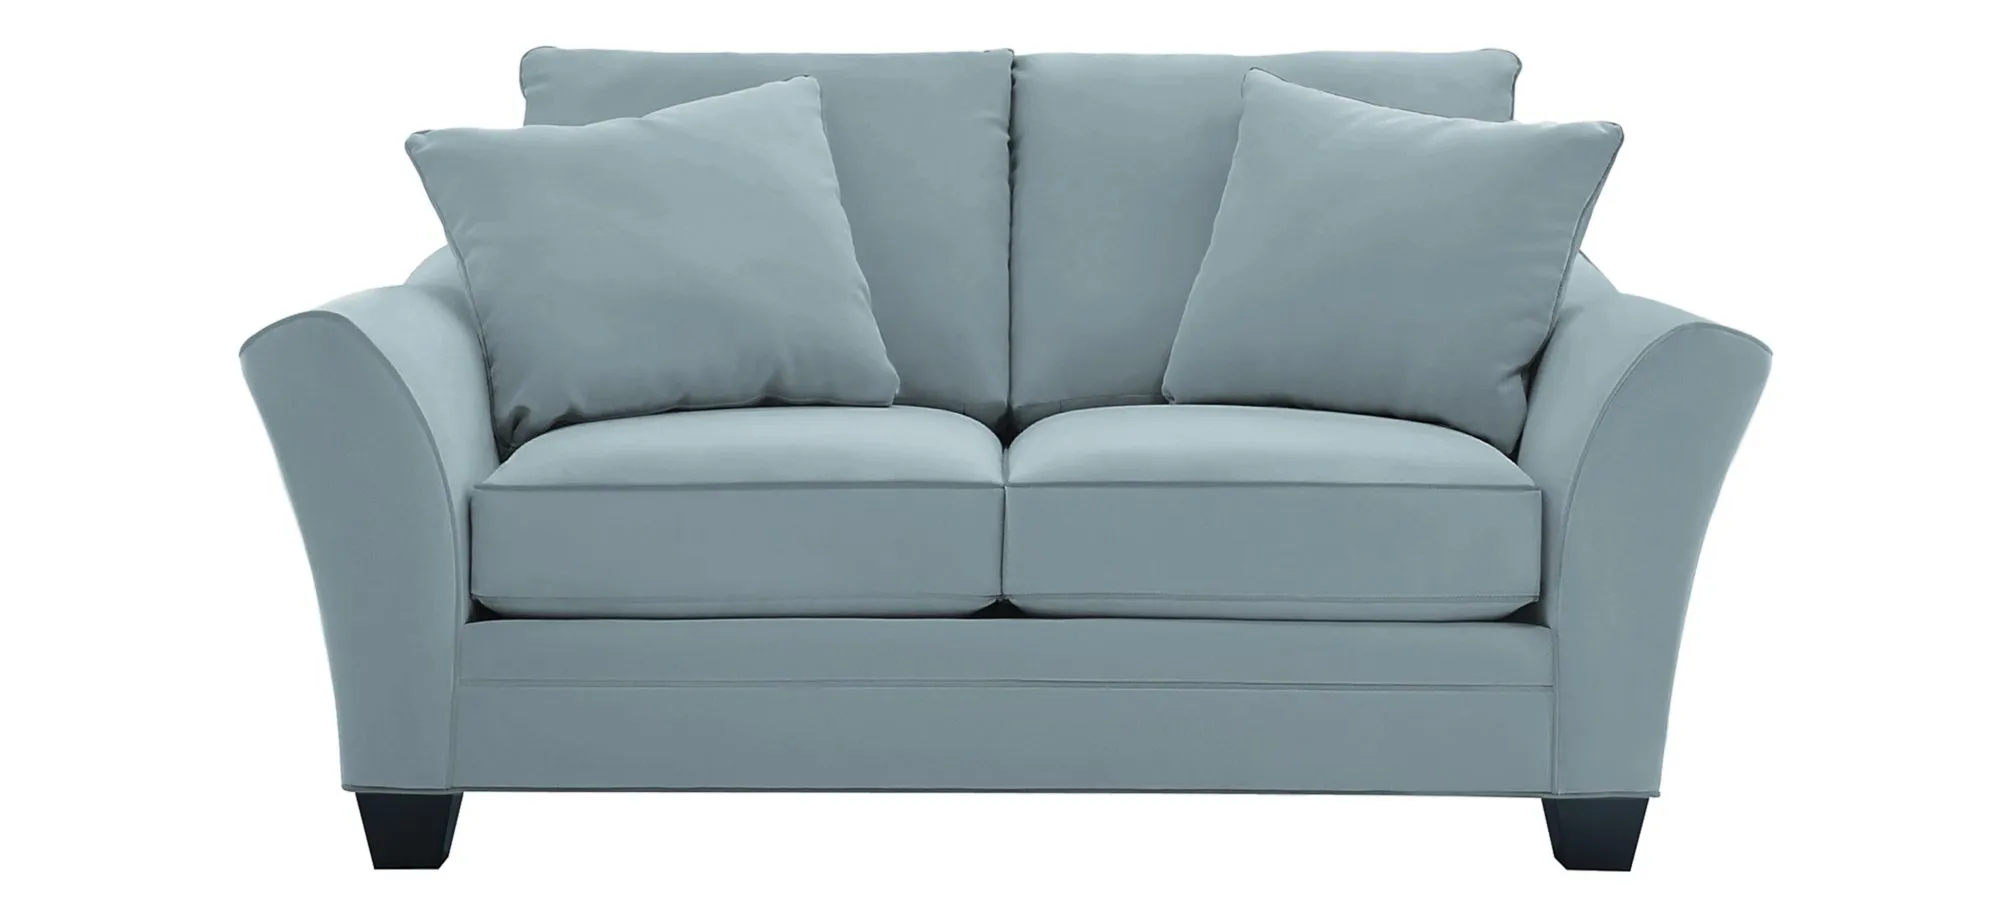 Briarwood Loveseat in Suede So Soft Hydra by H.M. Richards